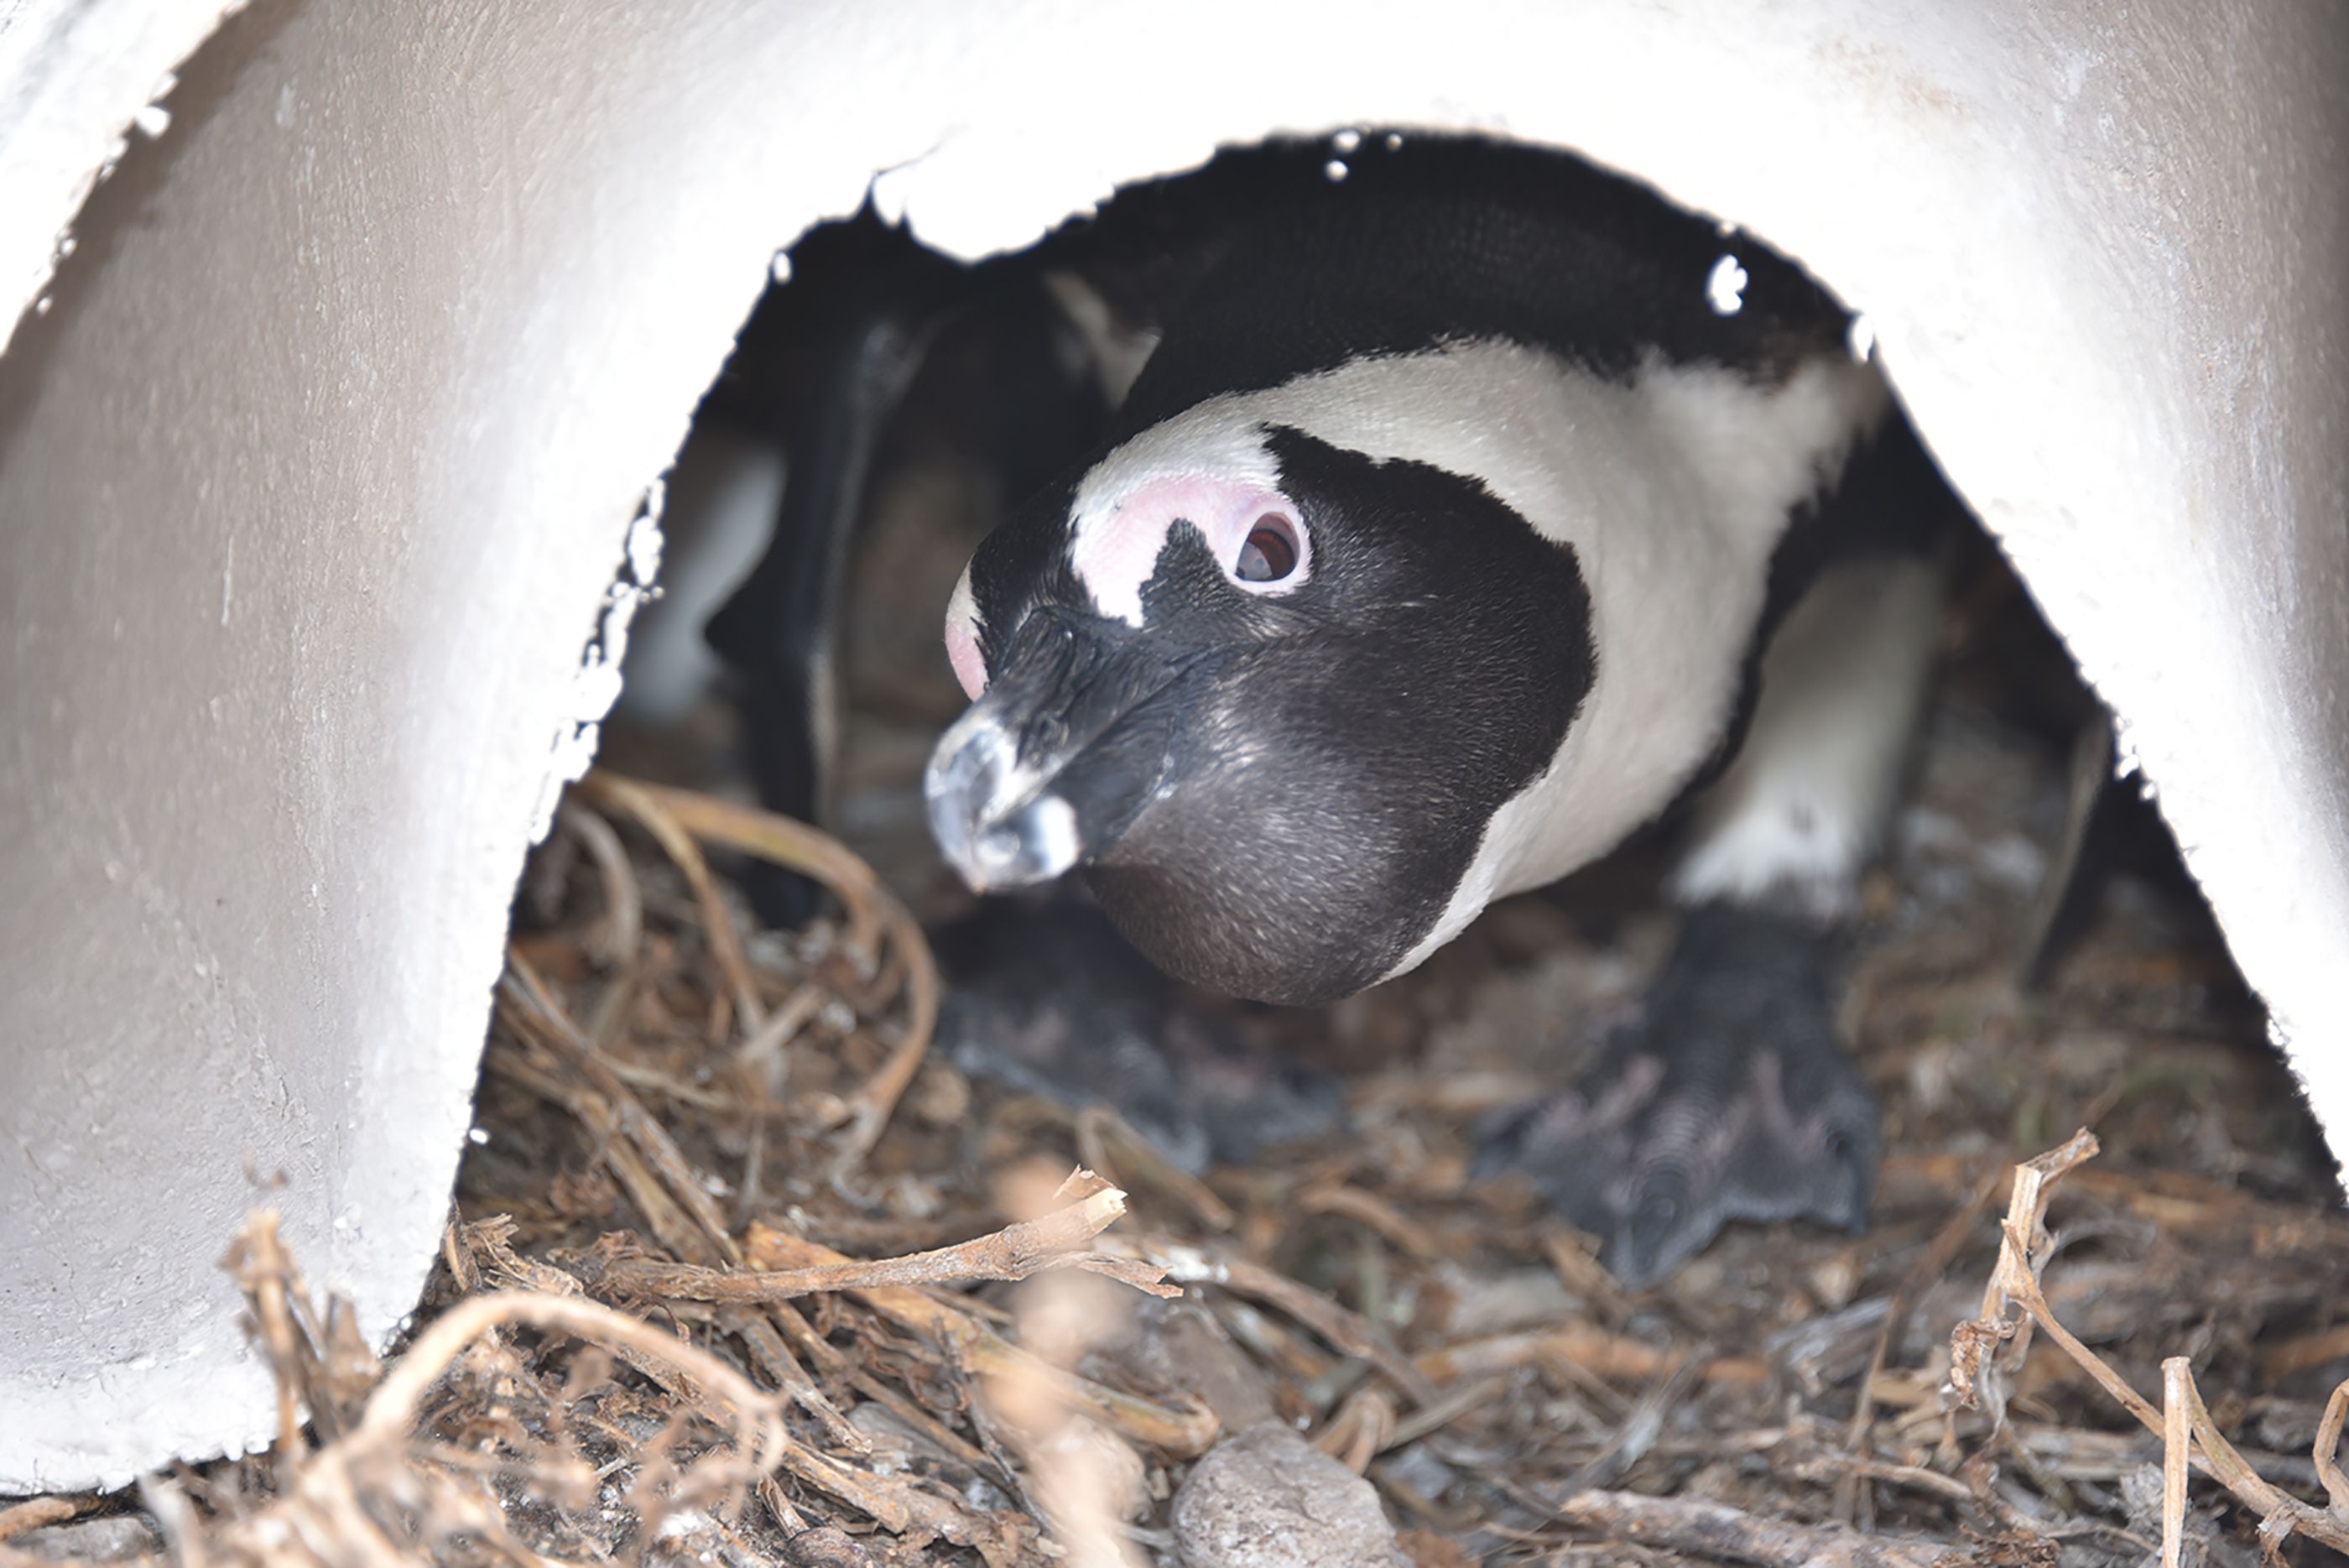 These little ceramic huts are helping endangered penguins and their chicks